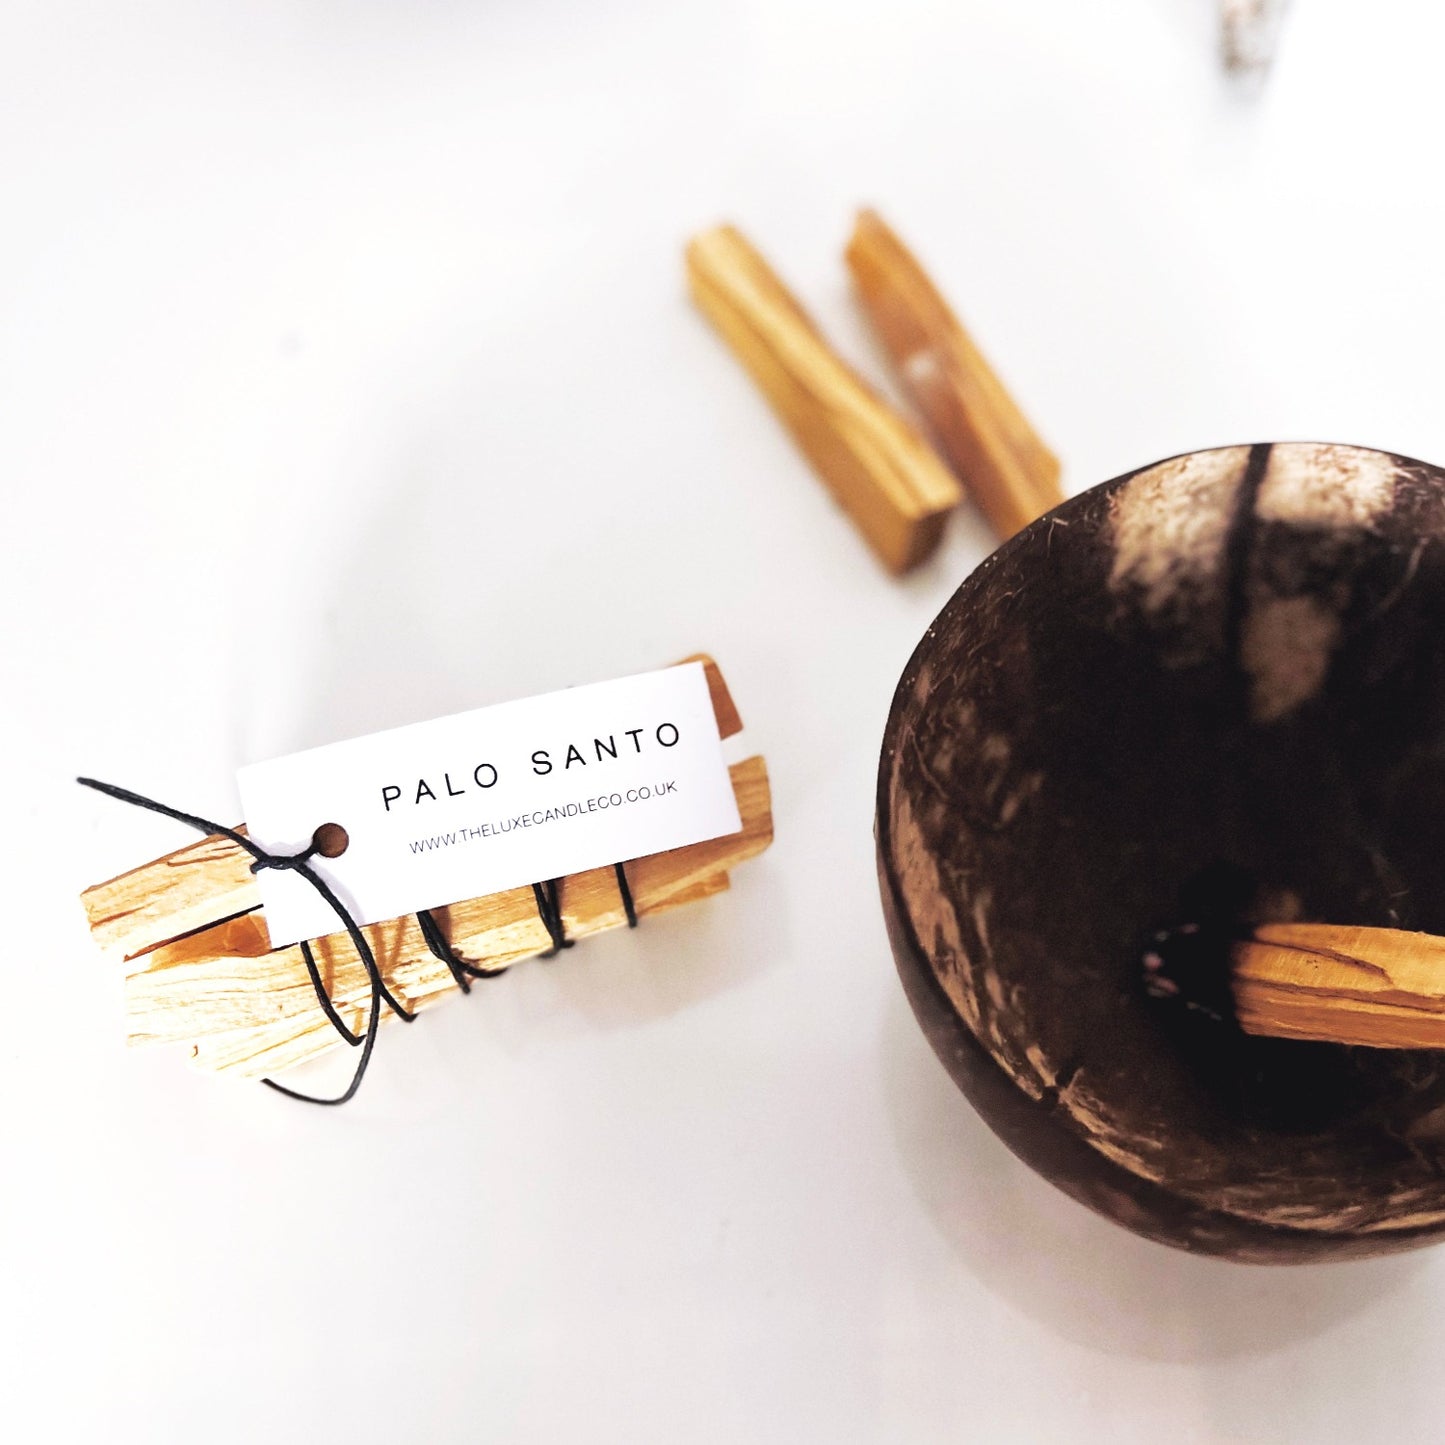 Palo santo sticks UK - The Luxe Candle Co Wellness + Self Care Collection